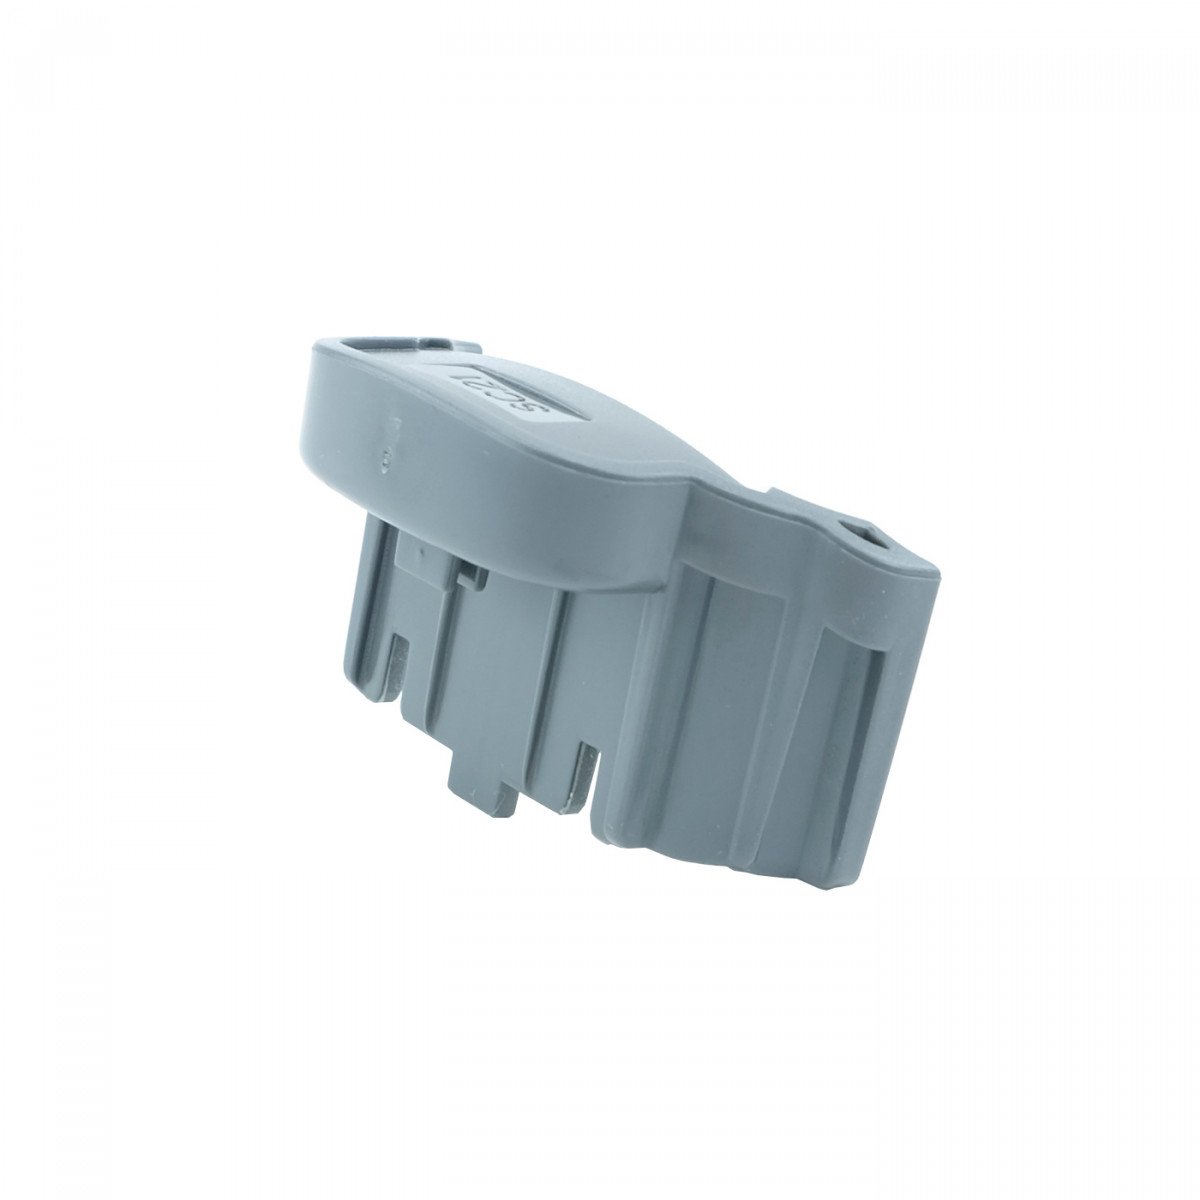 SEPURA charging slot insert for charging the SC21 in SC20-230V chargers 300-01910